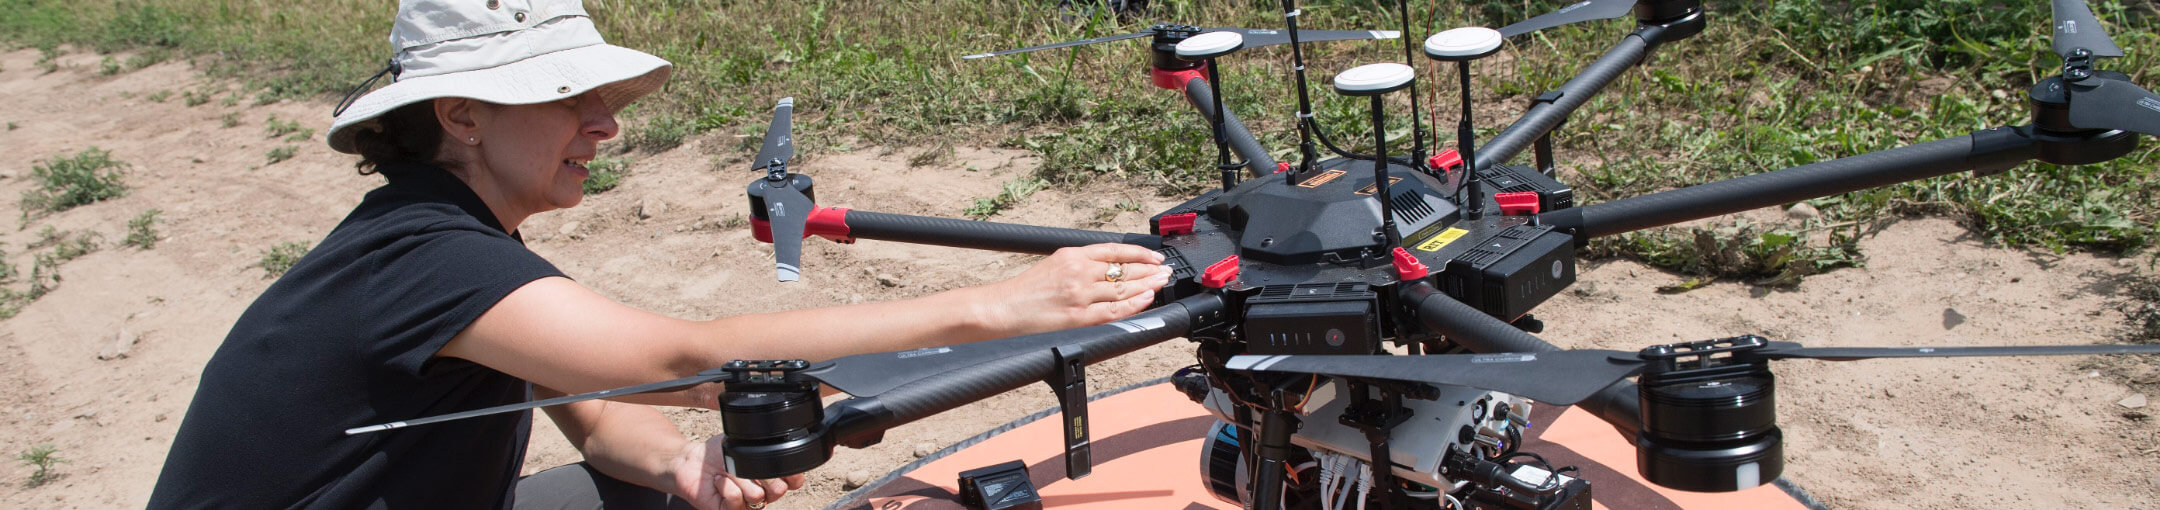 A researcher working on a drone in the field